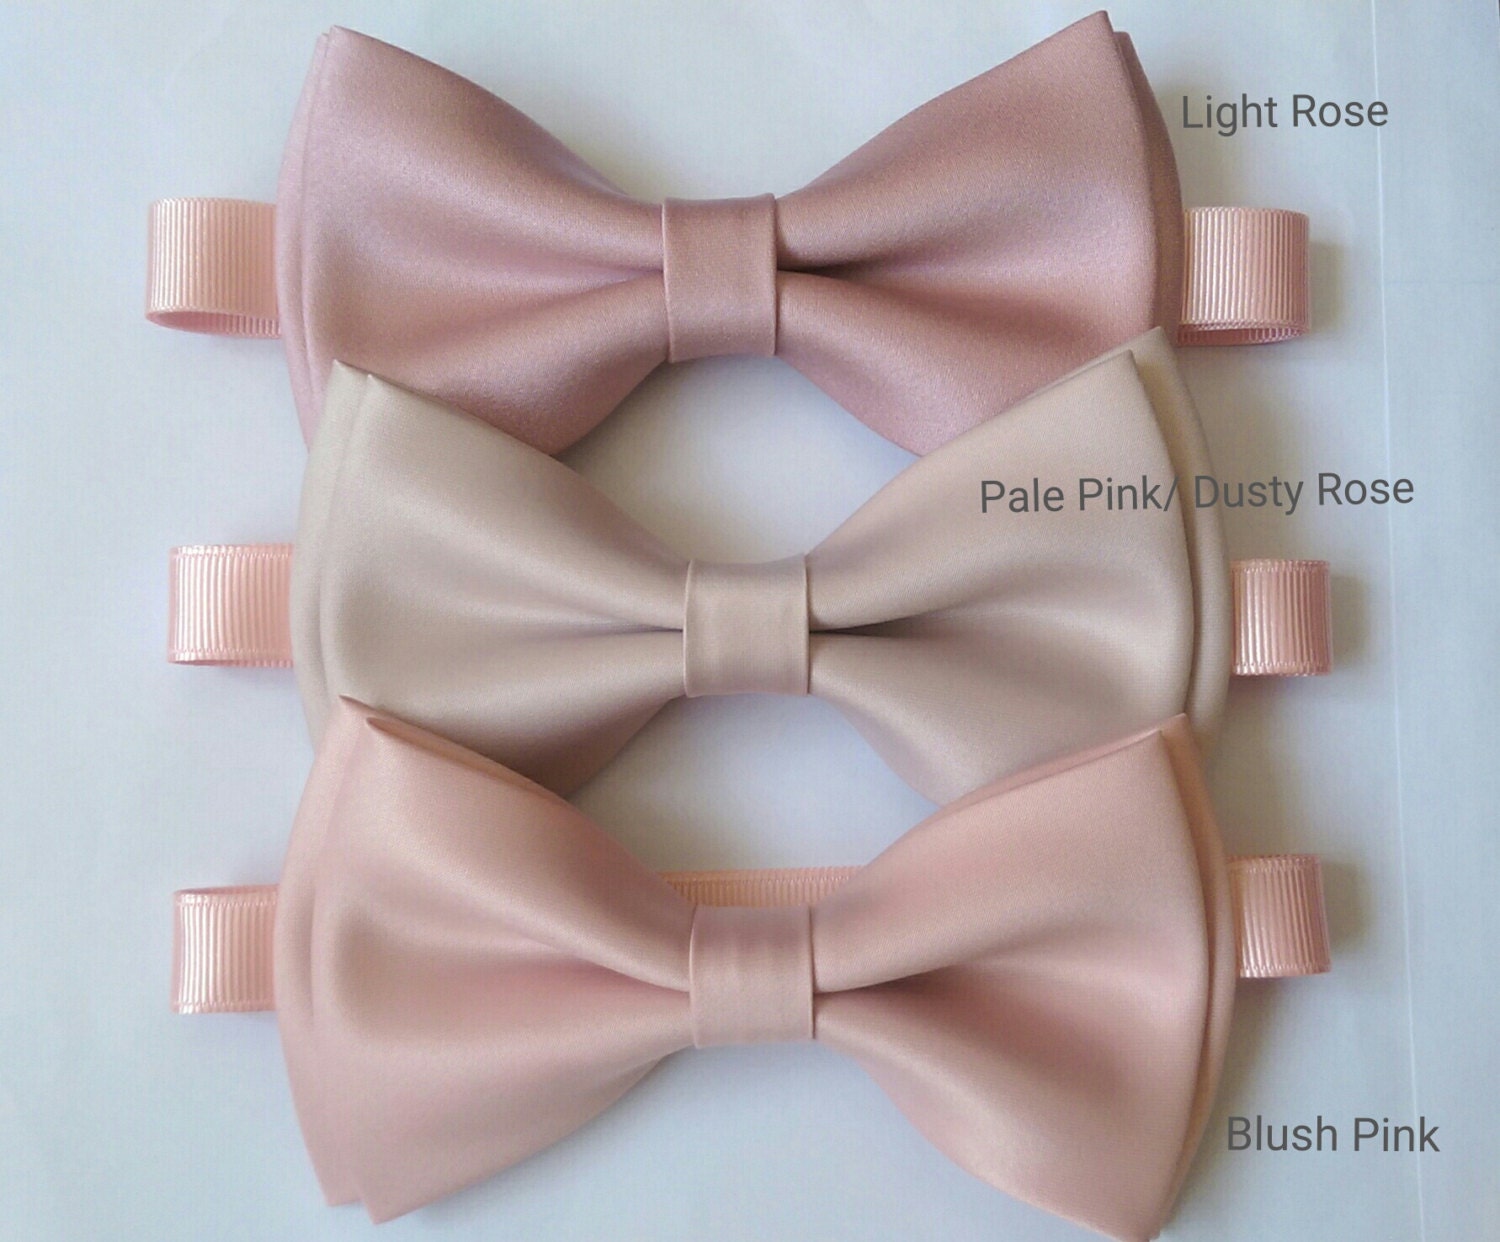 Pink Blush Dusty Rose Light Rose bow tie with pocket square